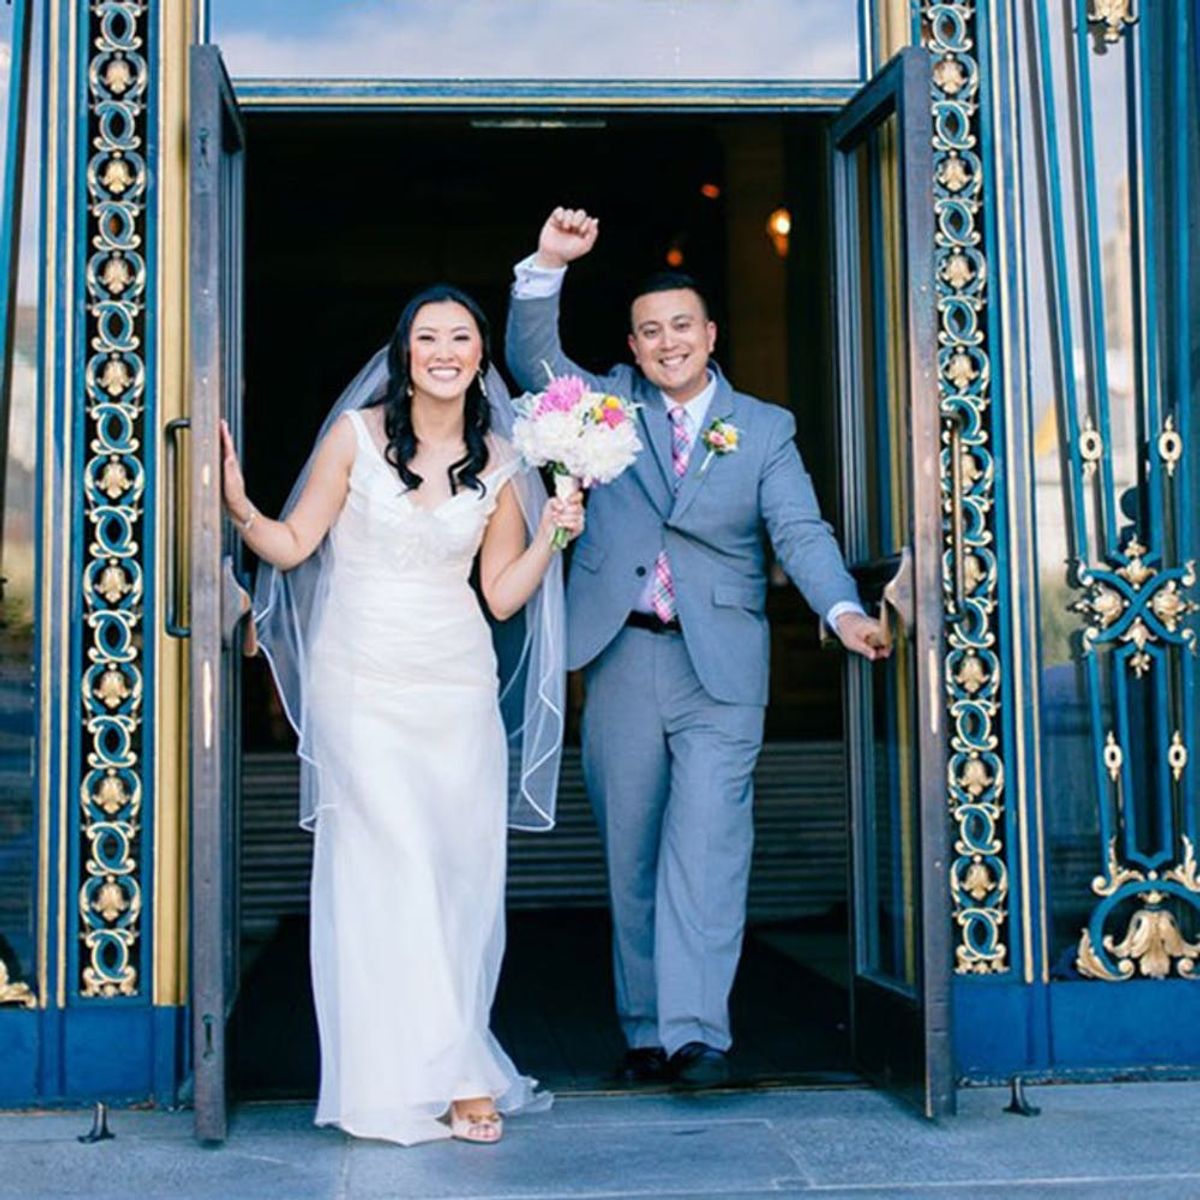 Get the DIY Details of This Multi-Cultural City Hall Wedding